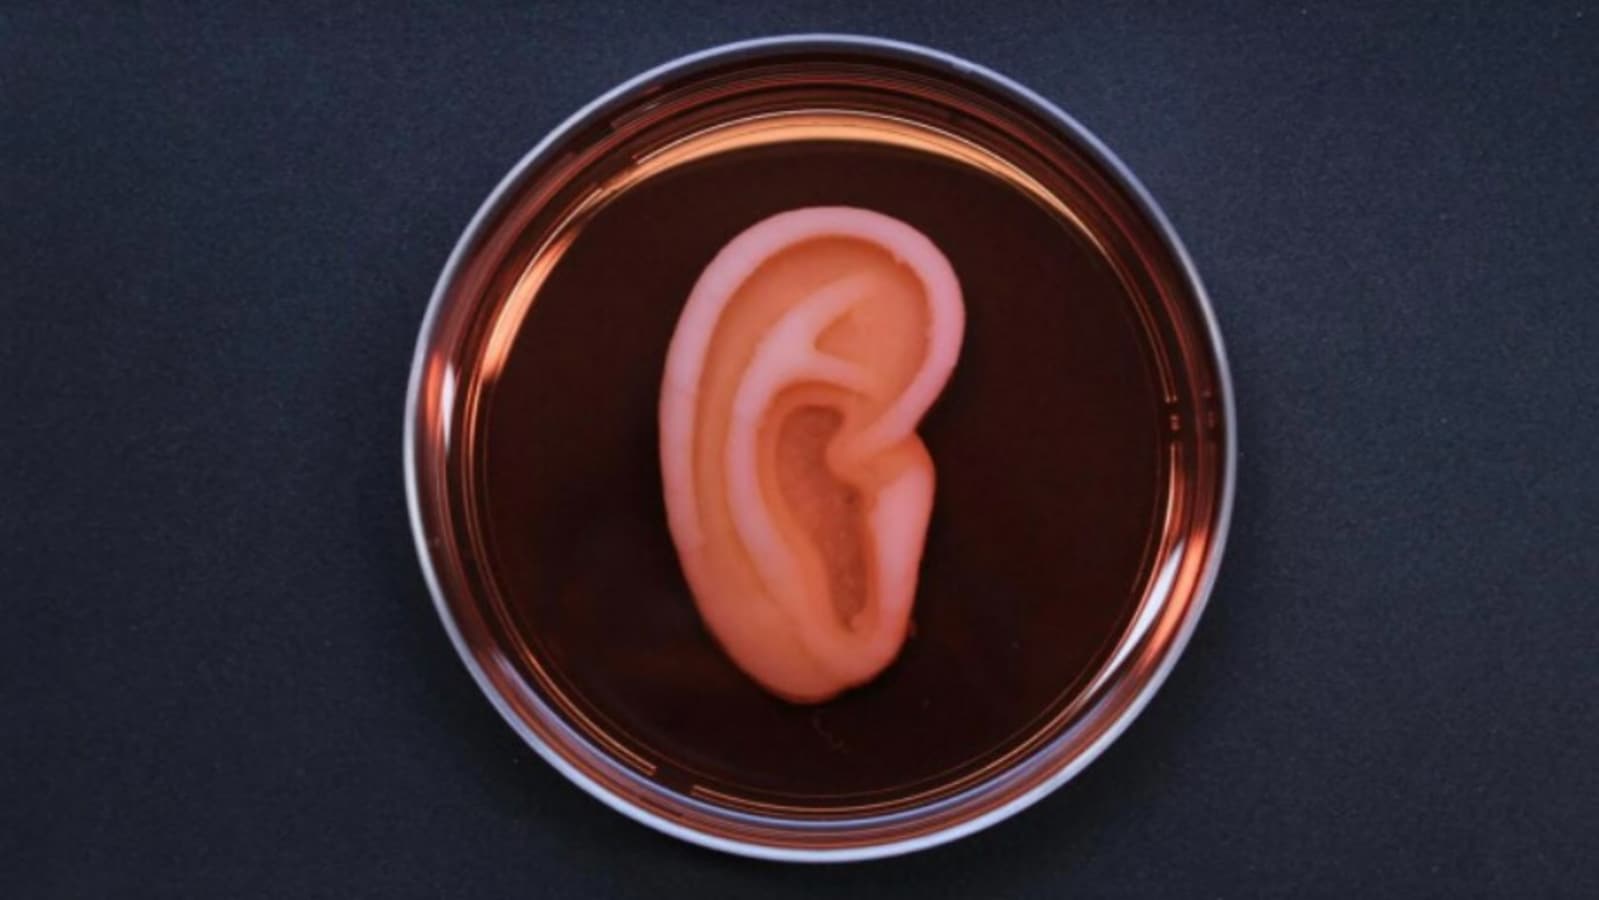 In a first, a patient receives 3-D printed ear implant made from her own cells